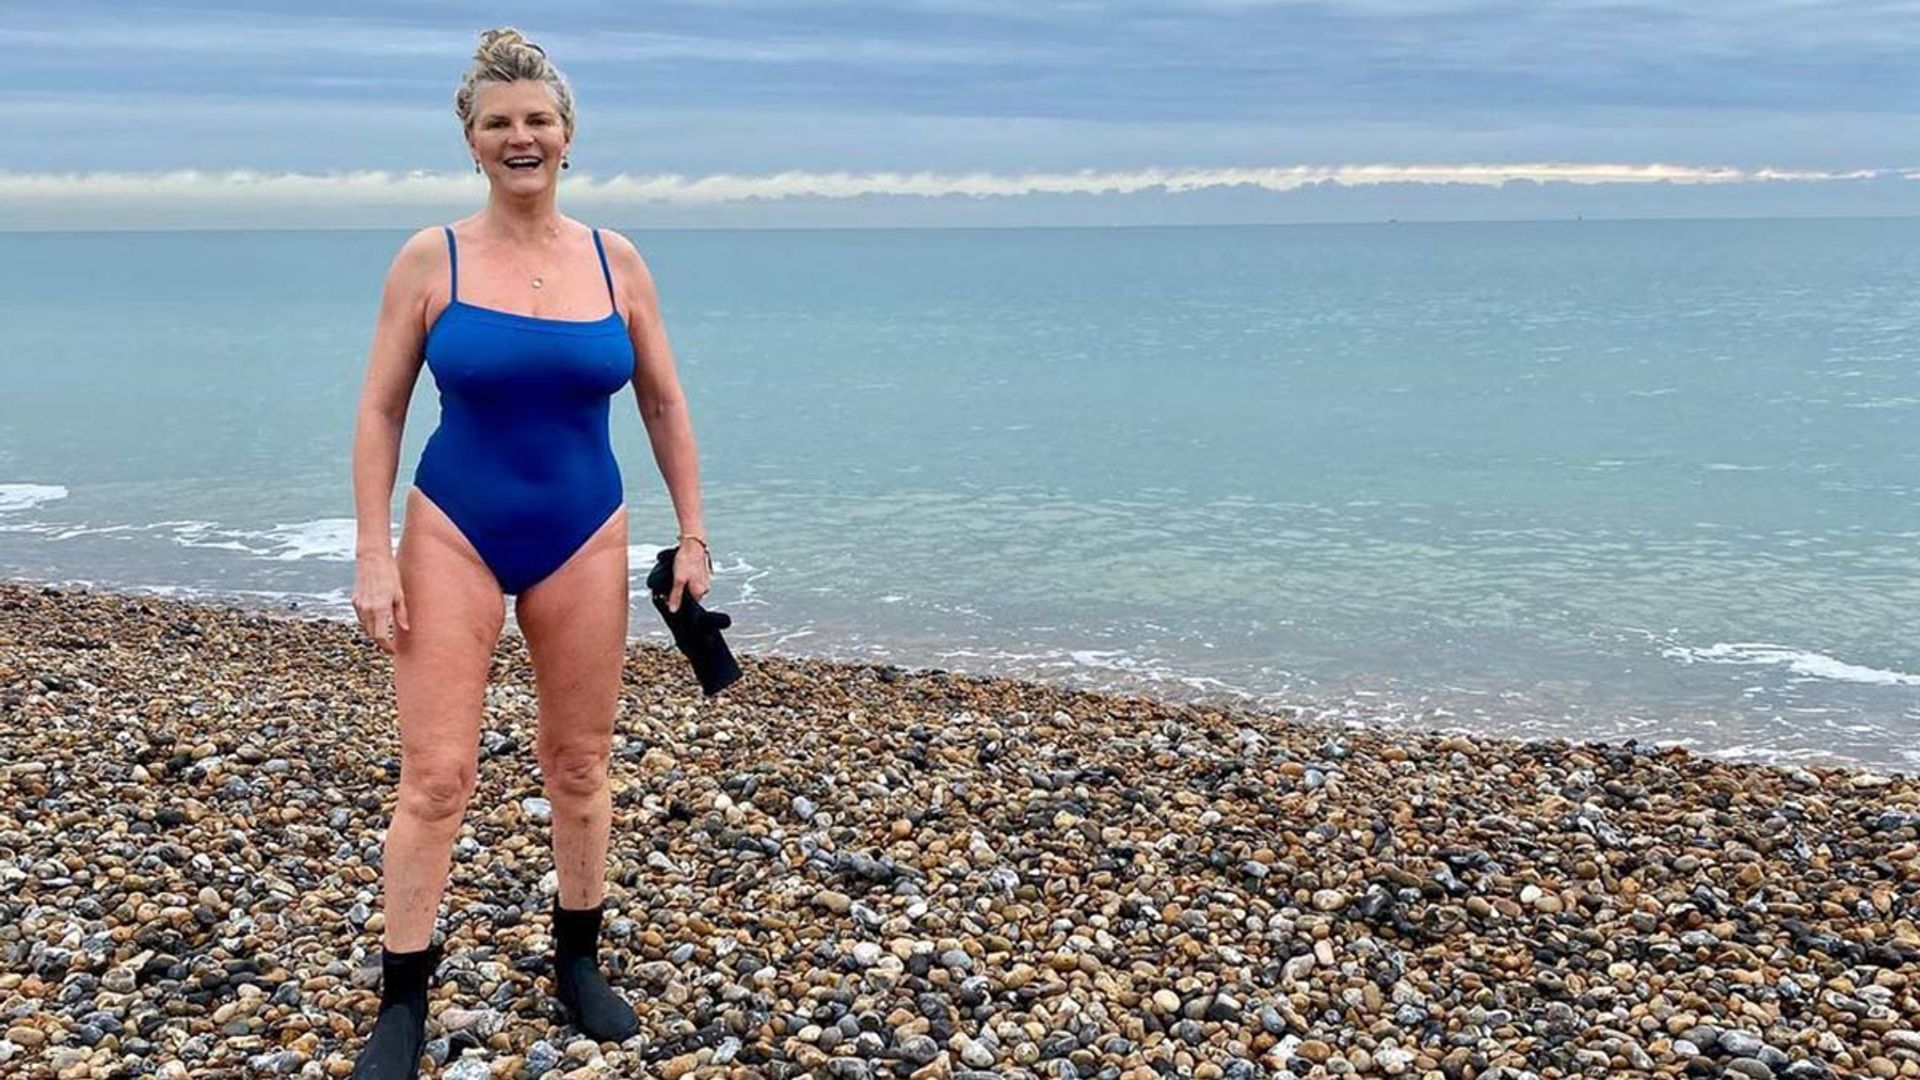 Strictly's Susannah Constantine reacts after being compared to 'Sindy' doll in swimsuit snap